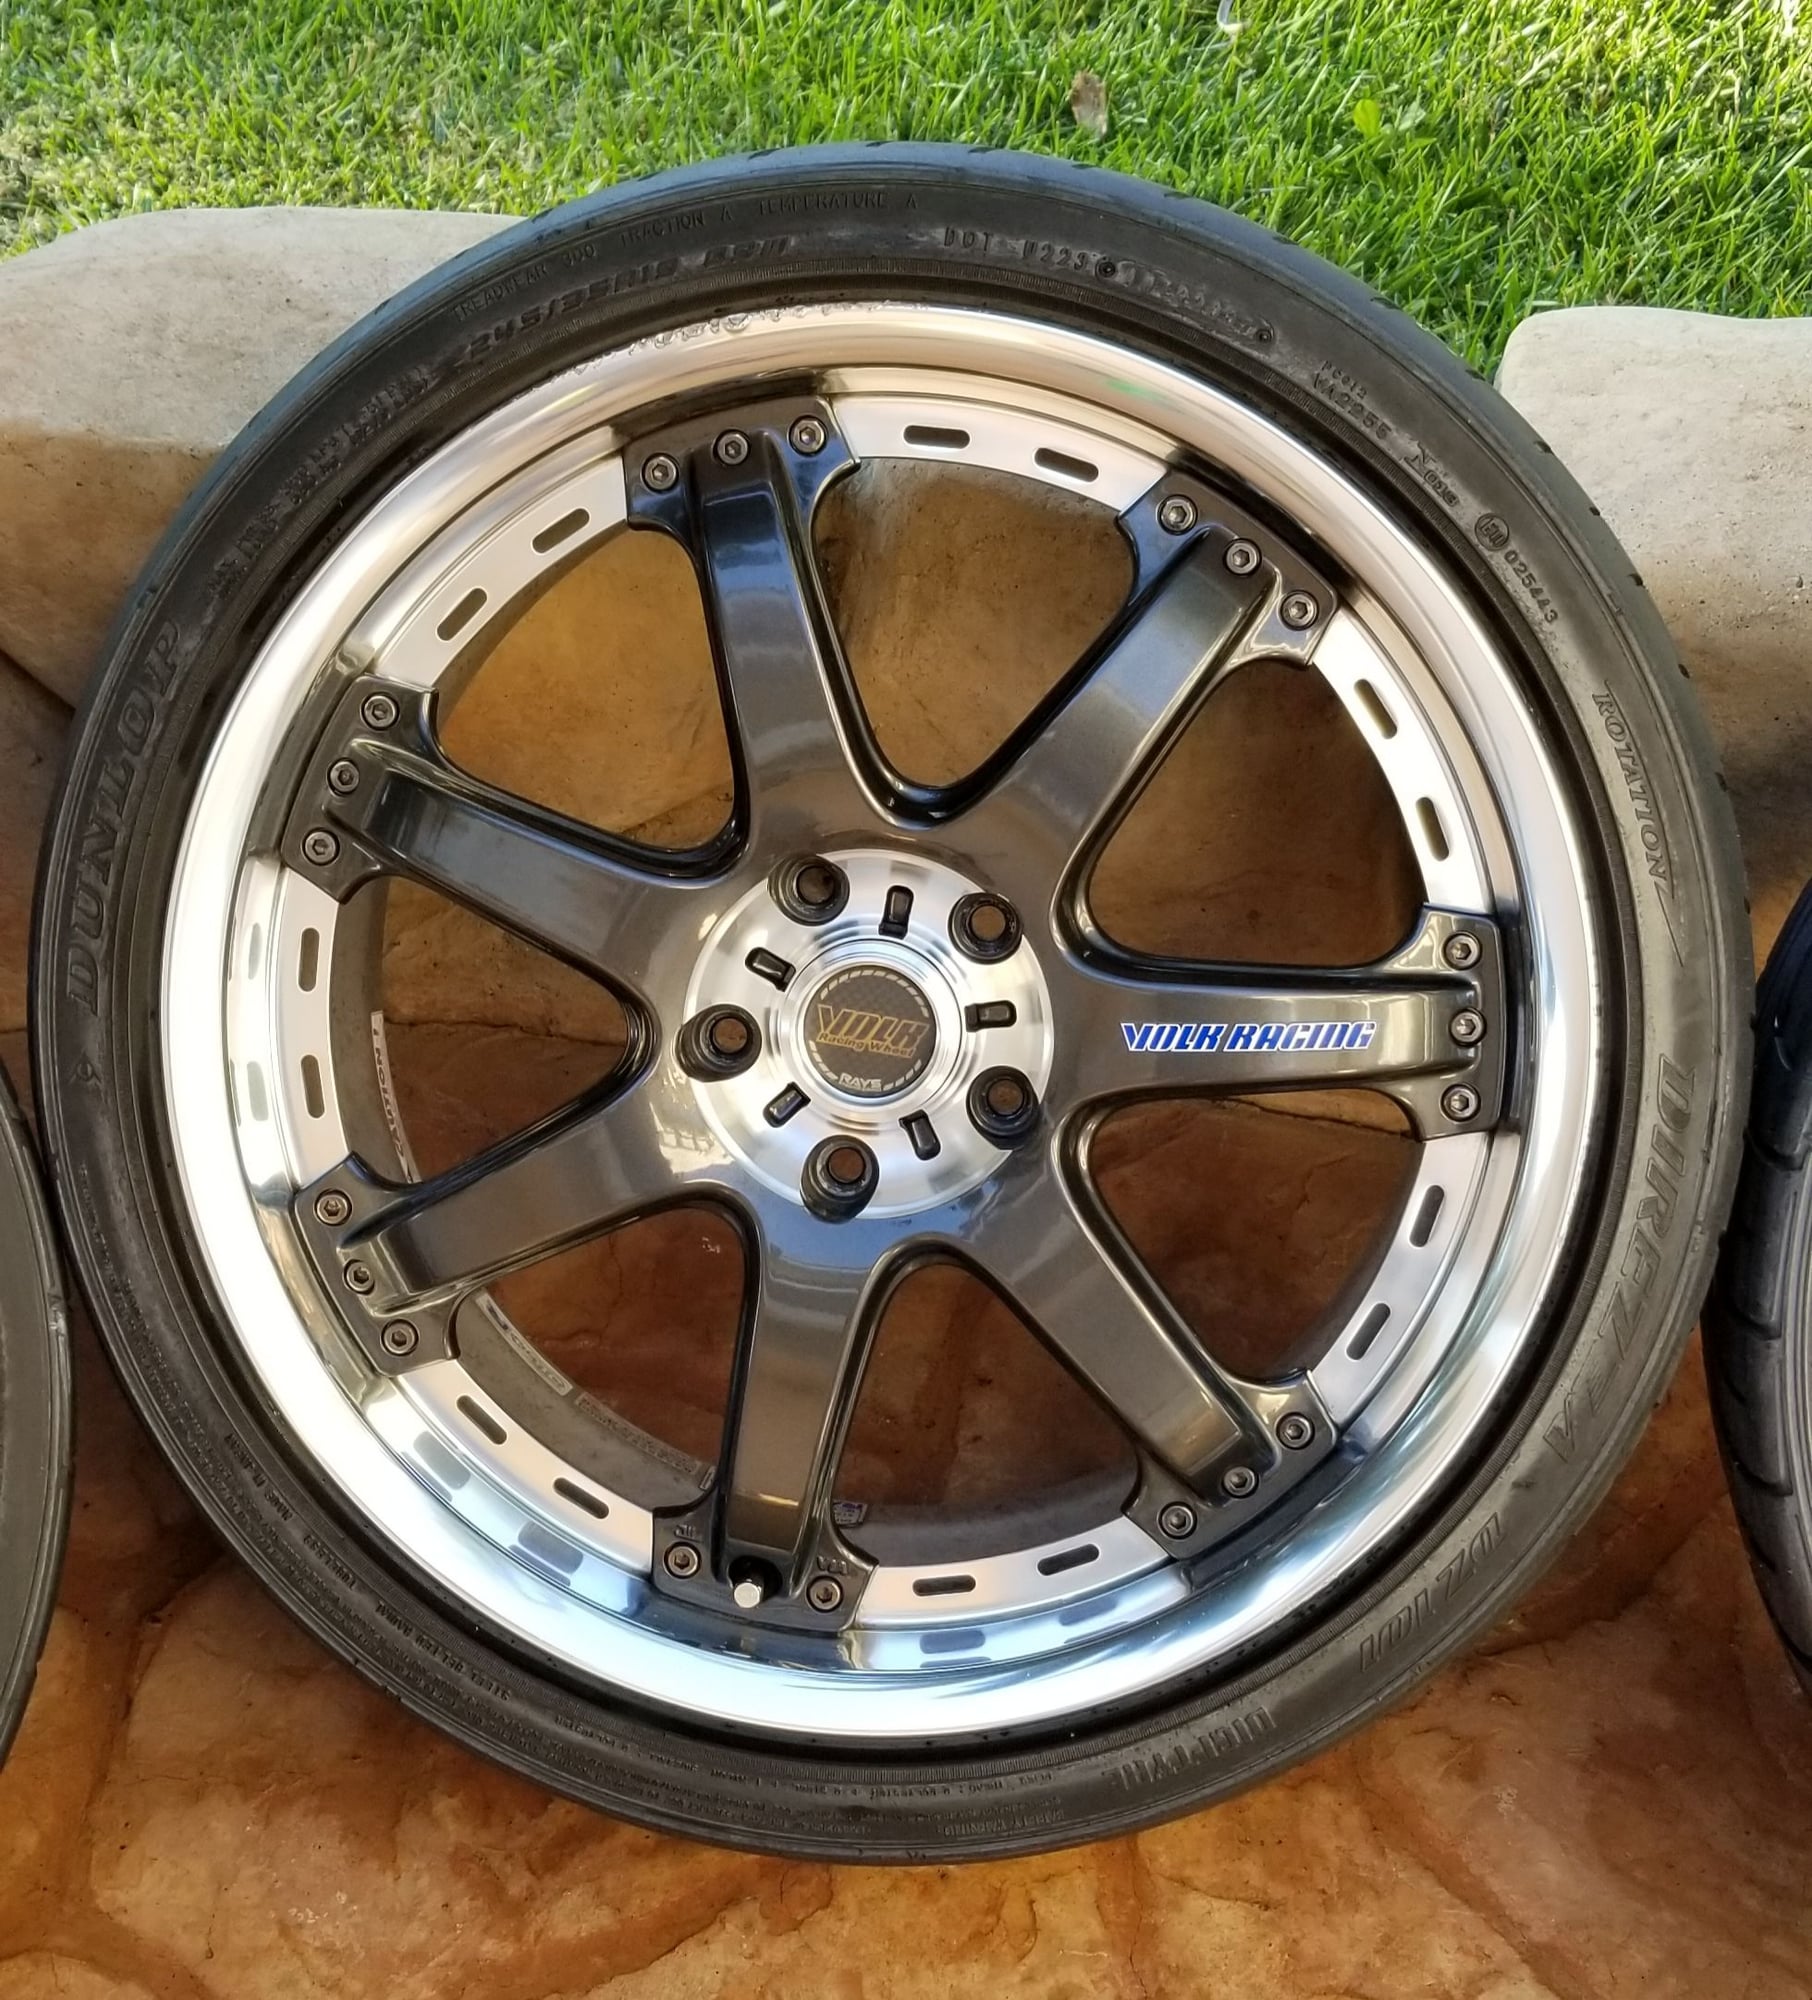 Wheels and Tires/Axles - Volk Racing GT-7 - Used - 2001 to 2005 Lexus IS300 - 1993 to 2006 Lexus GS300 - 2006 to 2013 Lexus IS250 - 1991 to 2018 Lexus ES300 - San Diego, CA 92126, United States